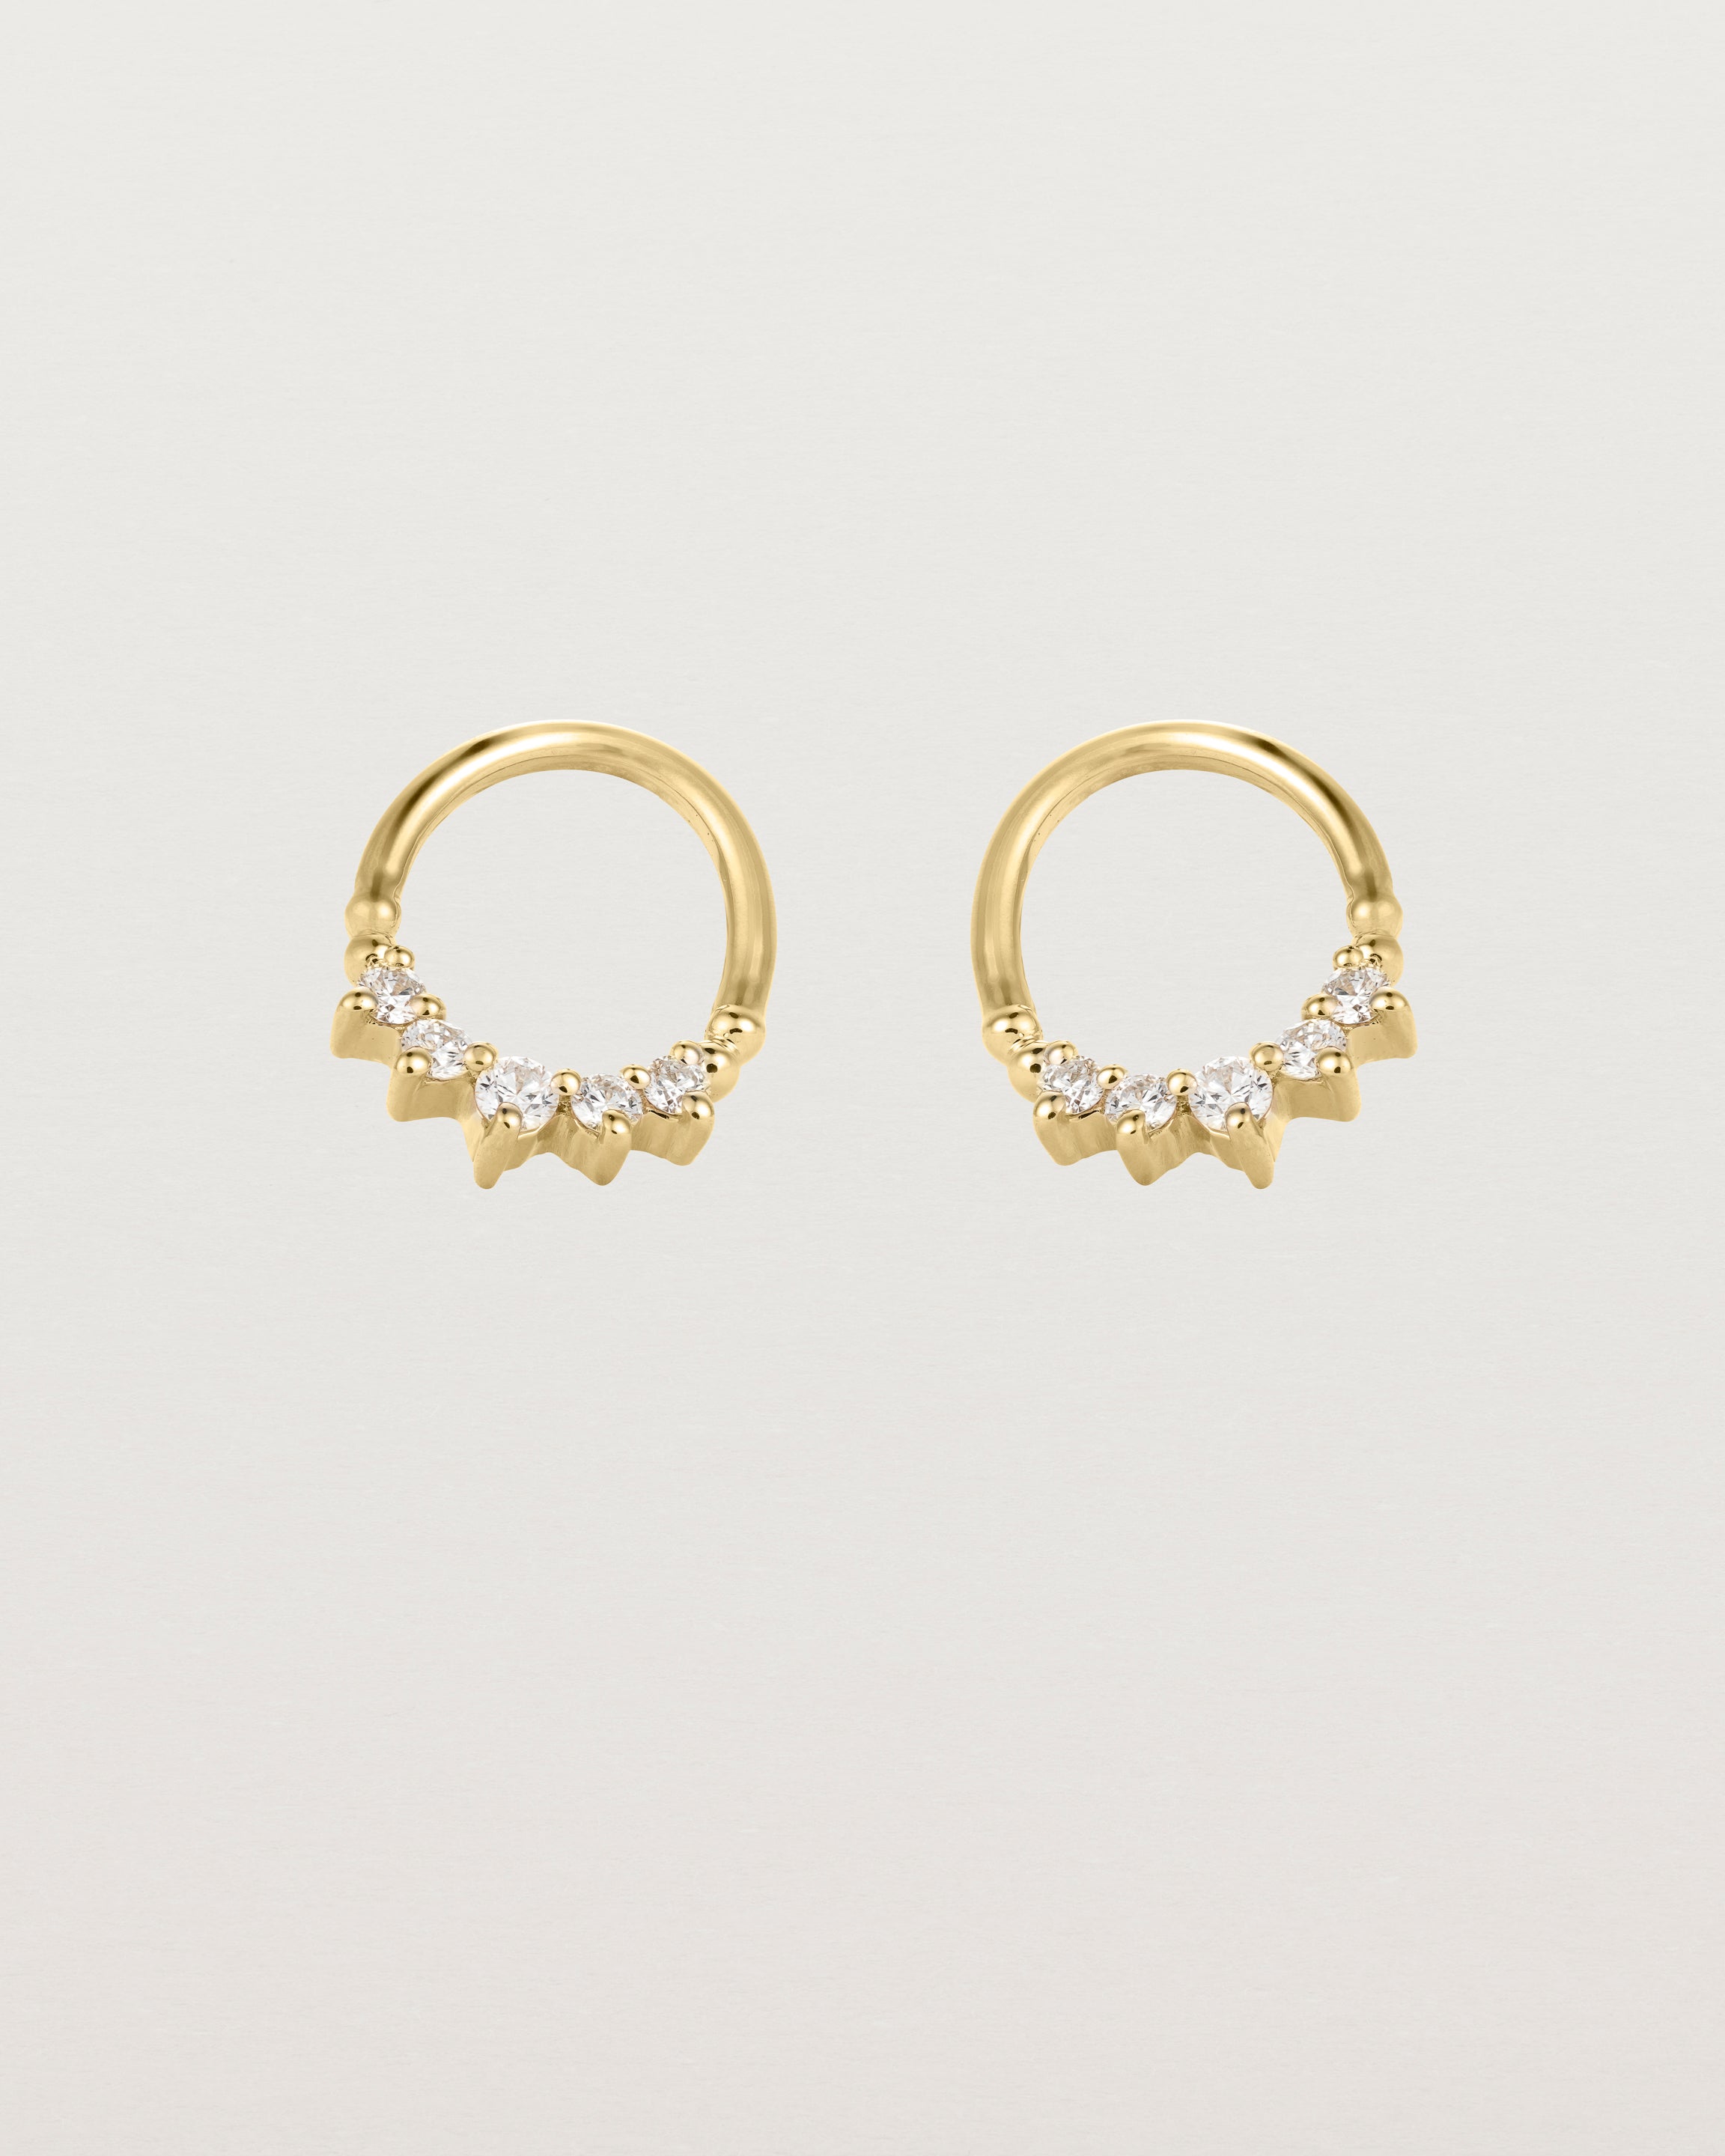 A pair of yellow gold oval studs with five white diamonds